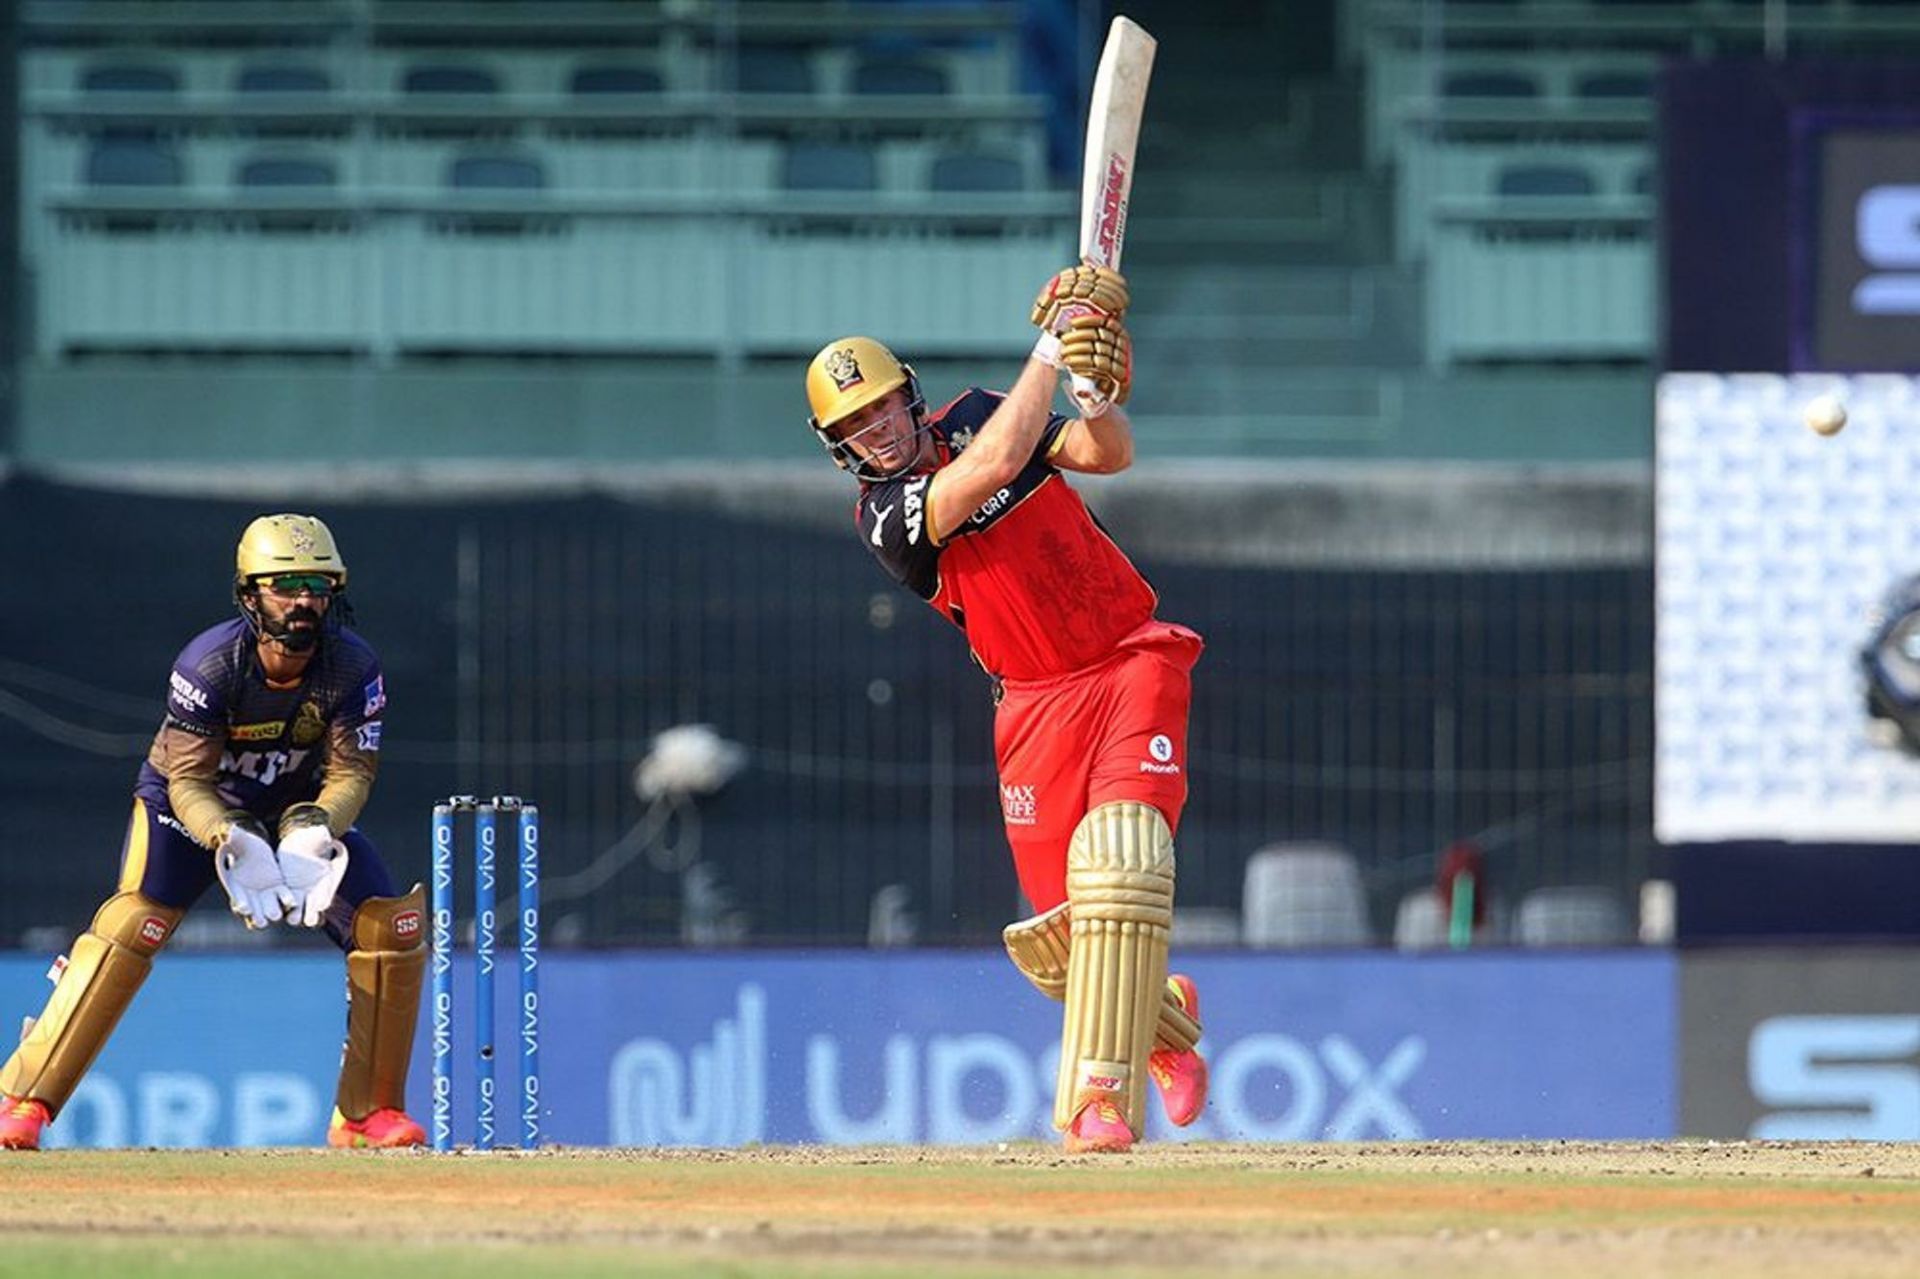 Dinesh Karthik (keeping the wickets) made his debut before AB de Villiers (Image Courtesy: IPLT20.com)